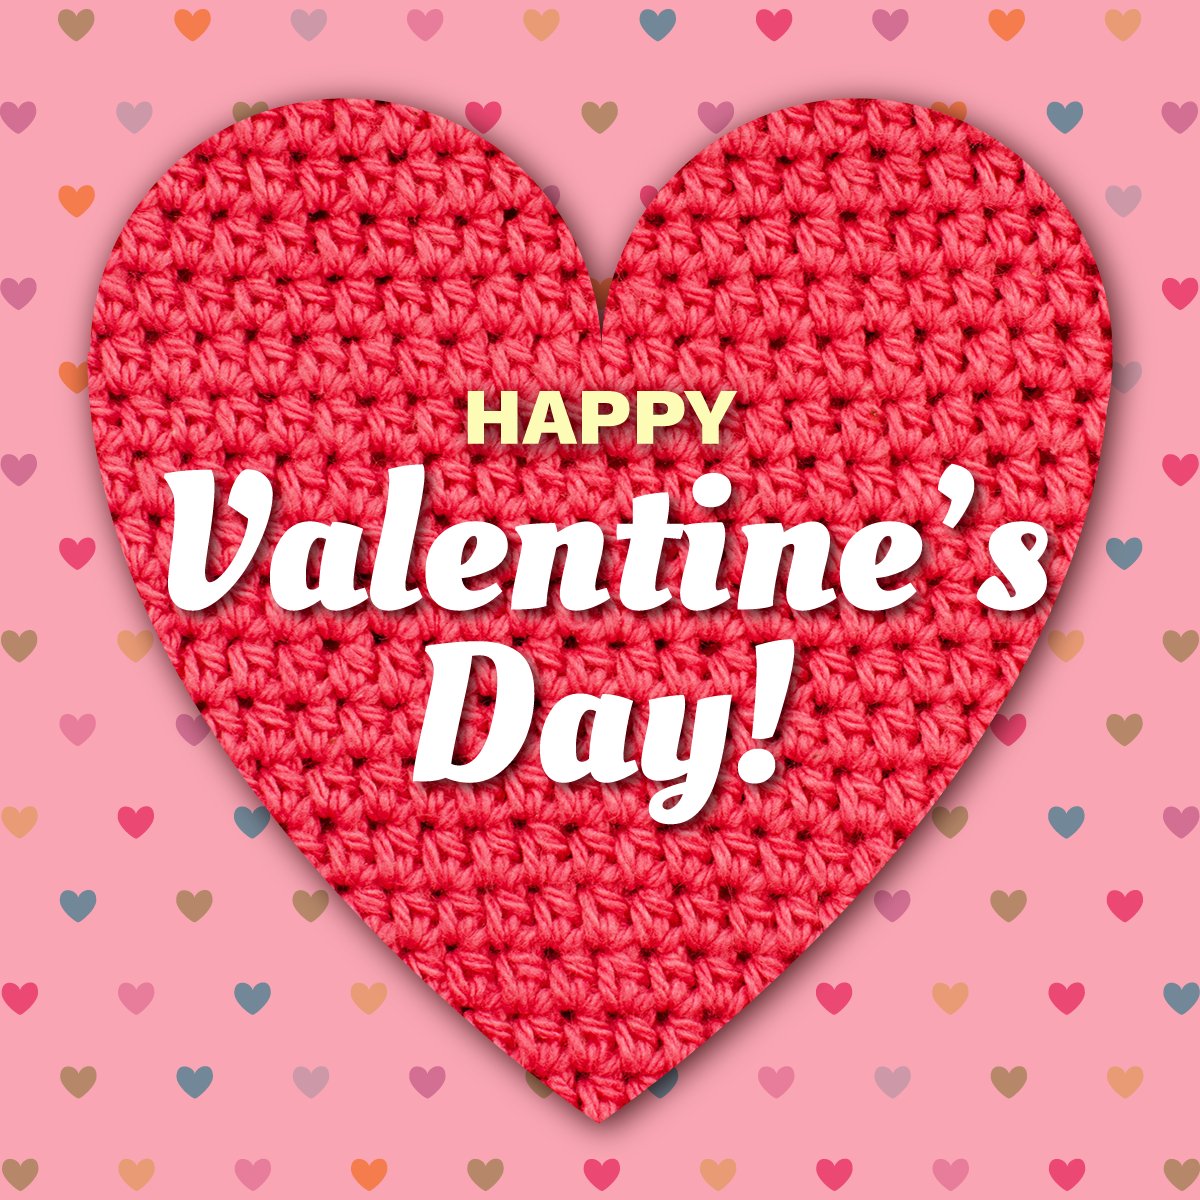 Wishing you a very sweet #ValentinesDay! ❤️ #ThriftLove